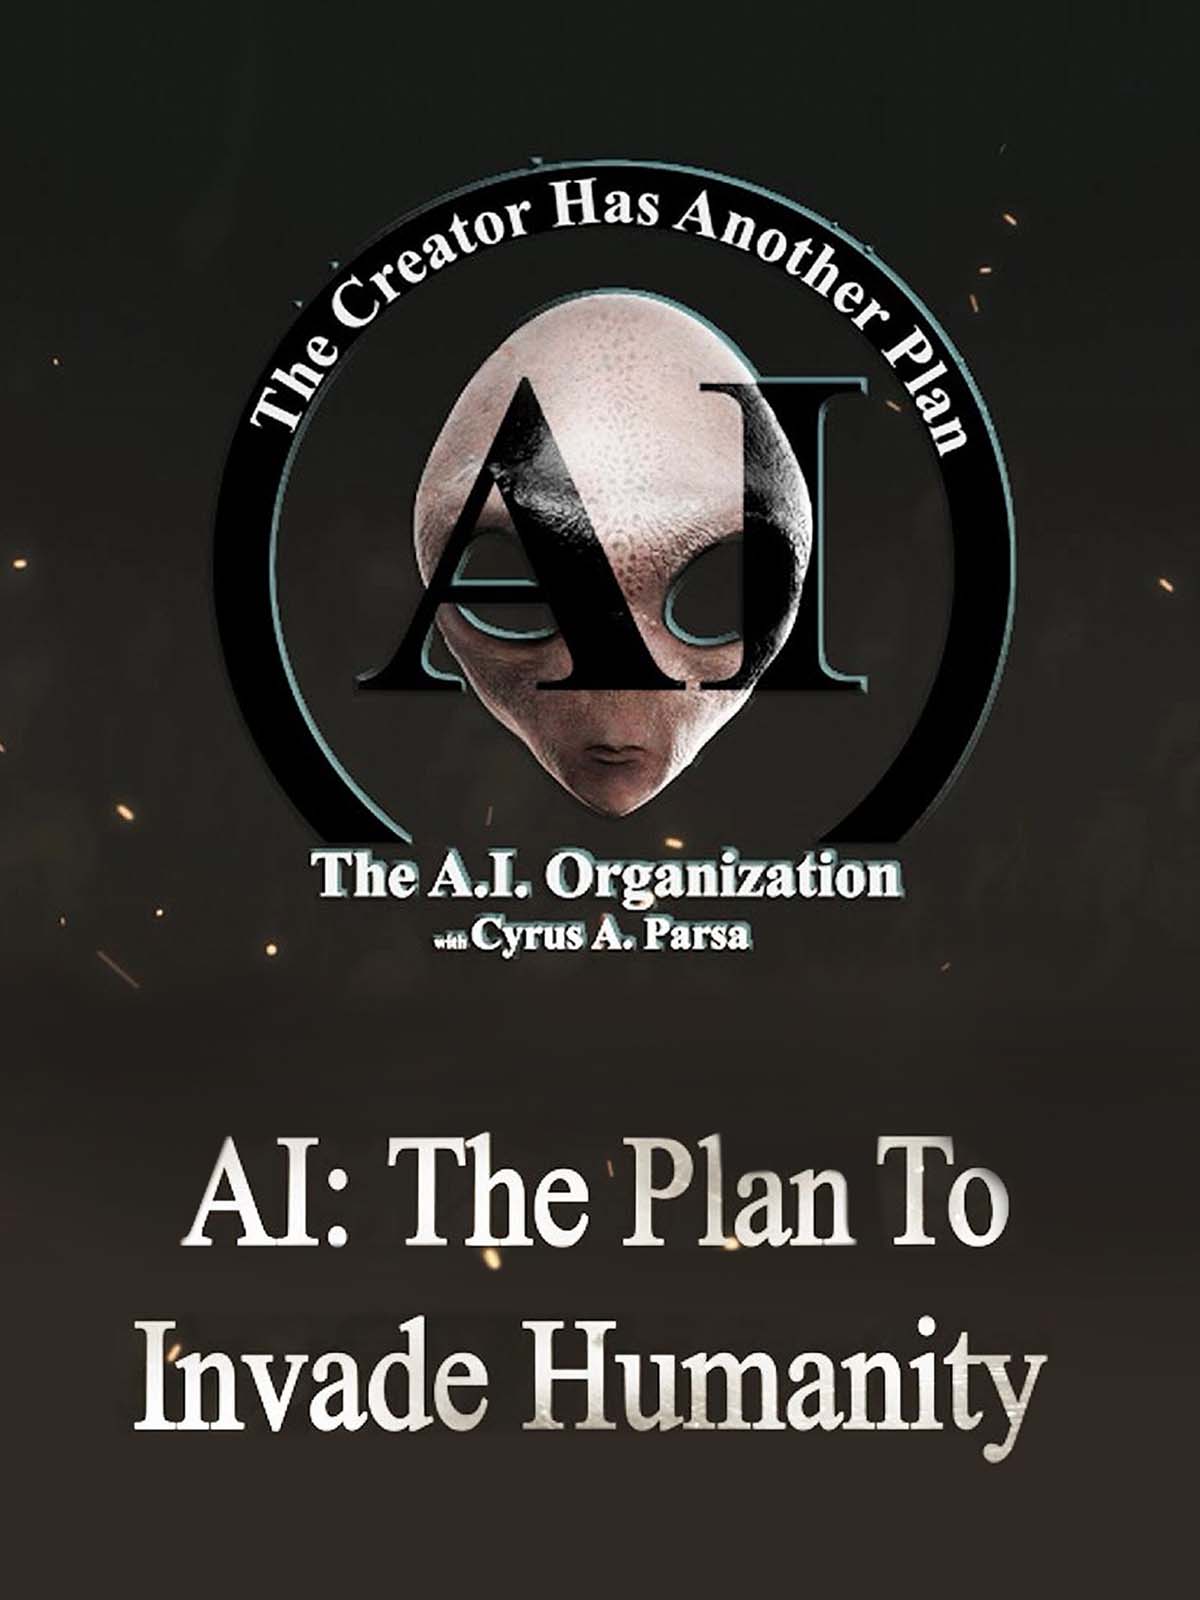 AI The Plan to Invade Humanity 3-4 Jpeg